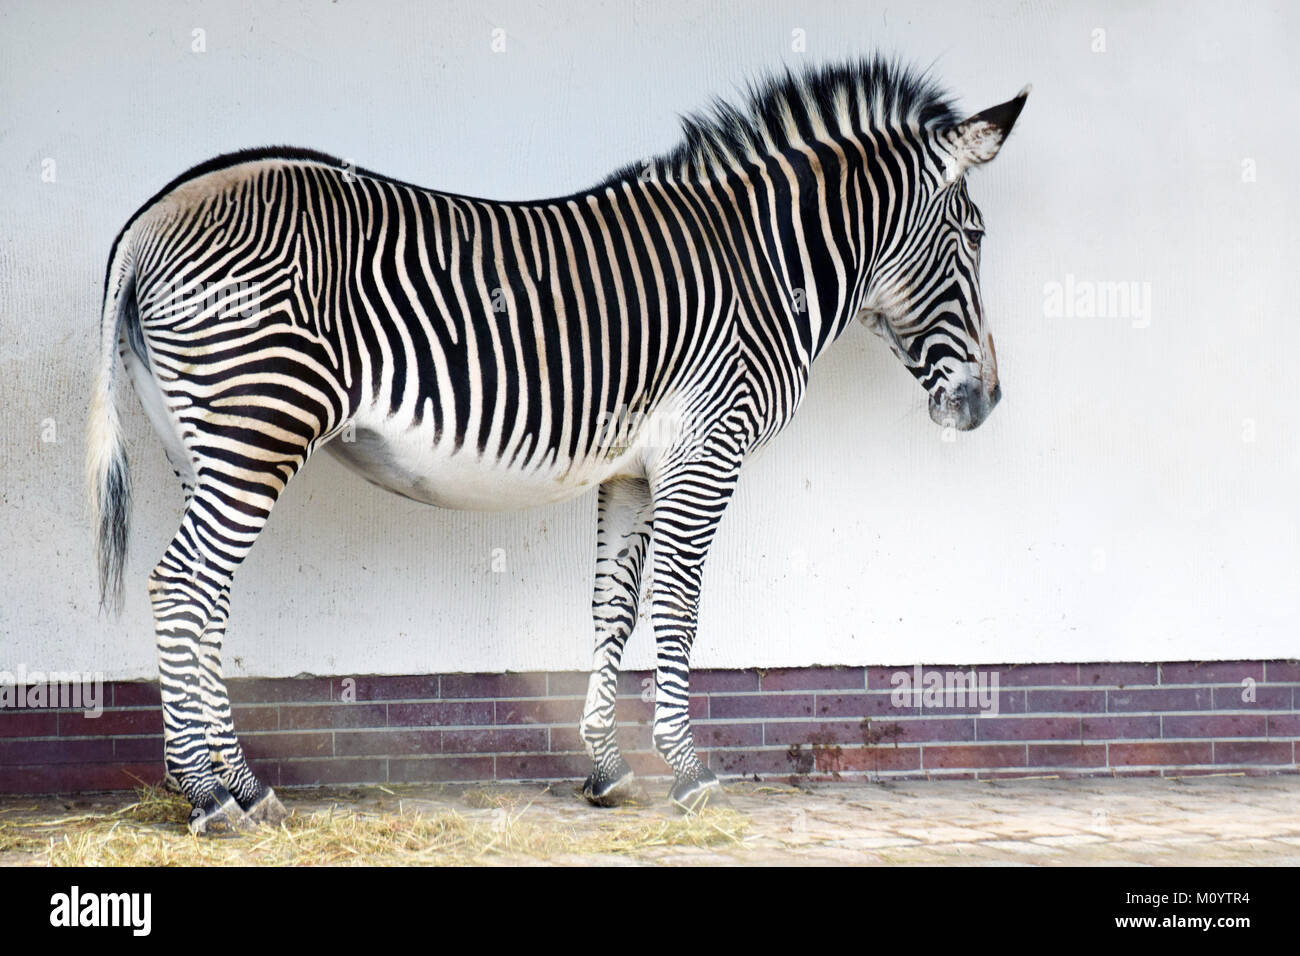 Zebra standing in front of a wall. Stock Photo